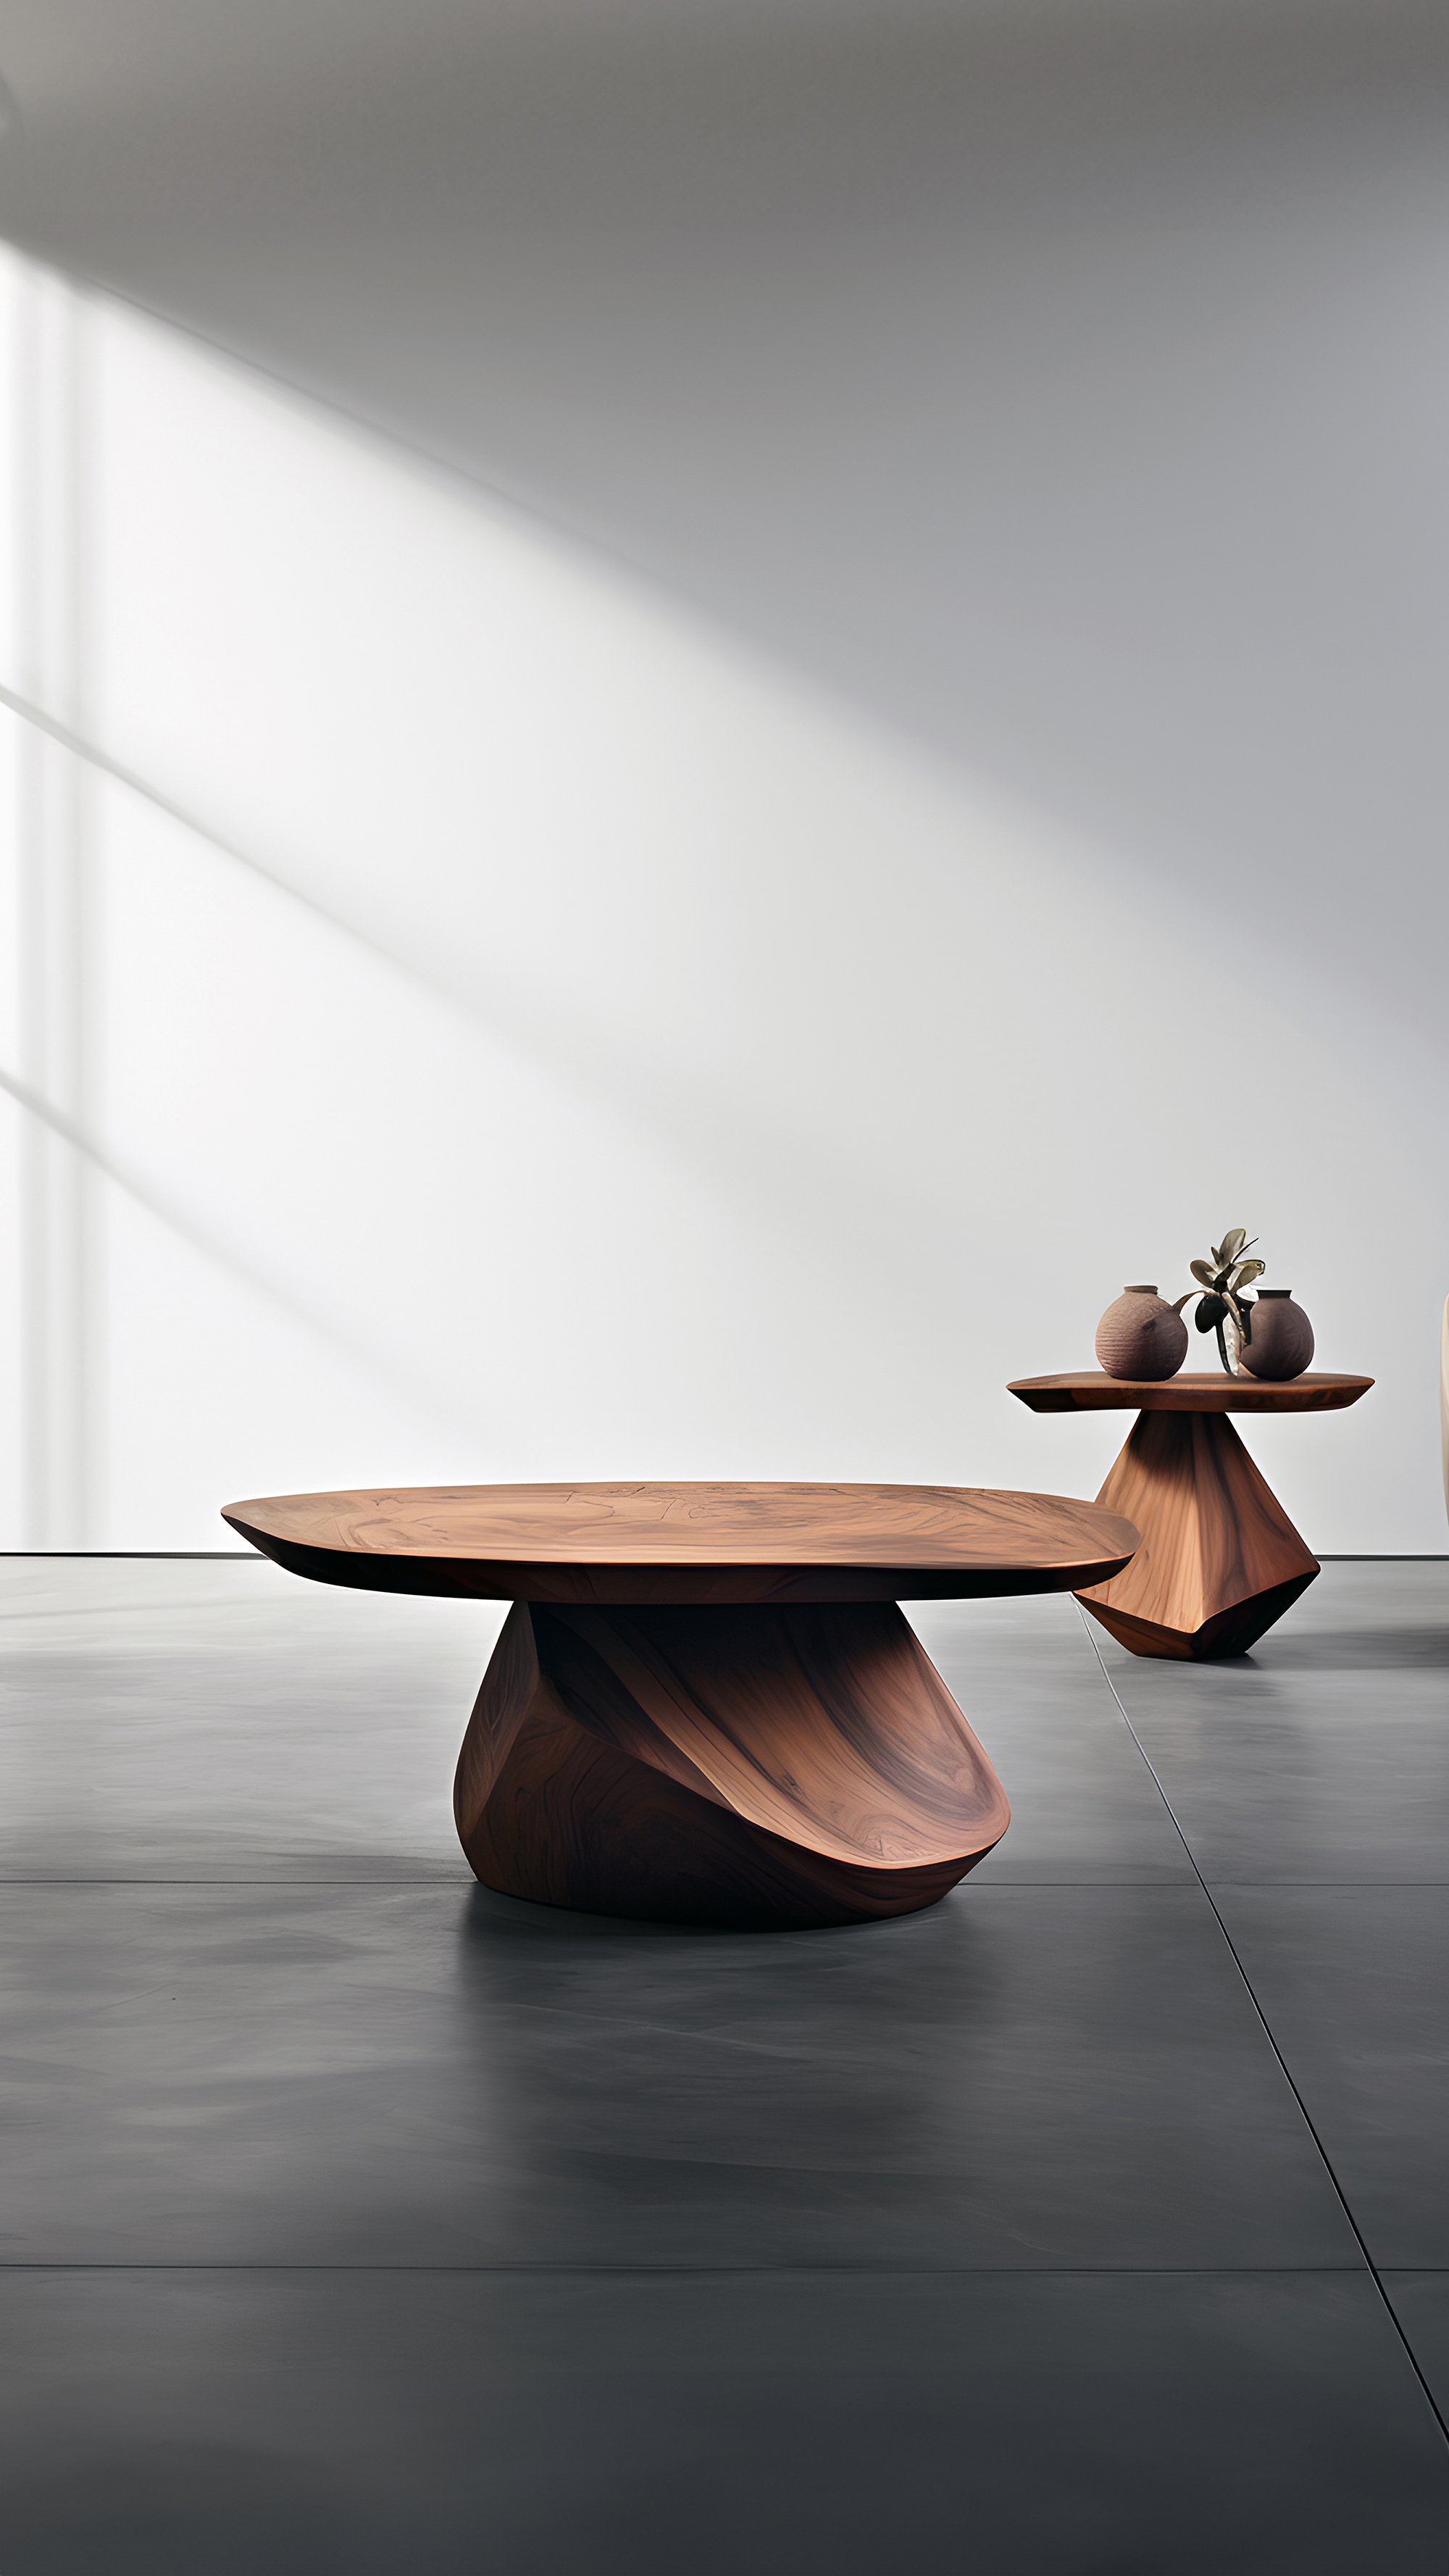 Sculptural Coffee Table Made of Solid Wood, Center Table Solace S38 by Joel Escalona — 7.jpg